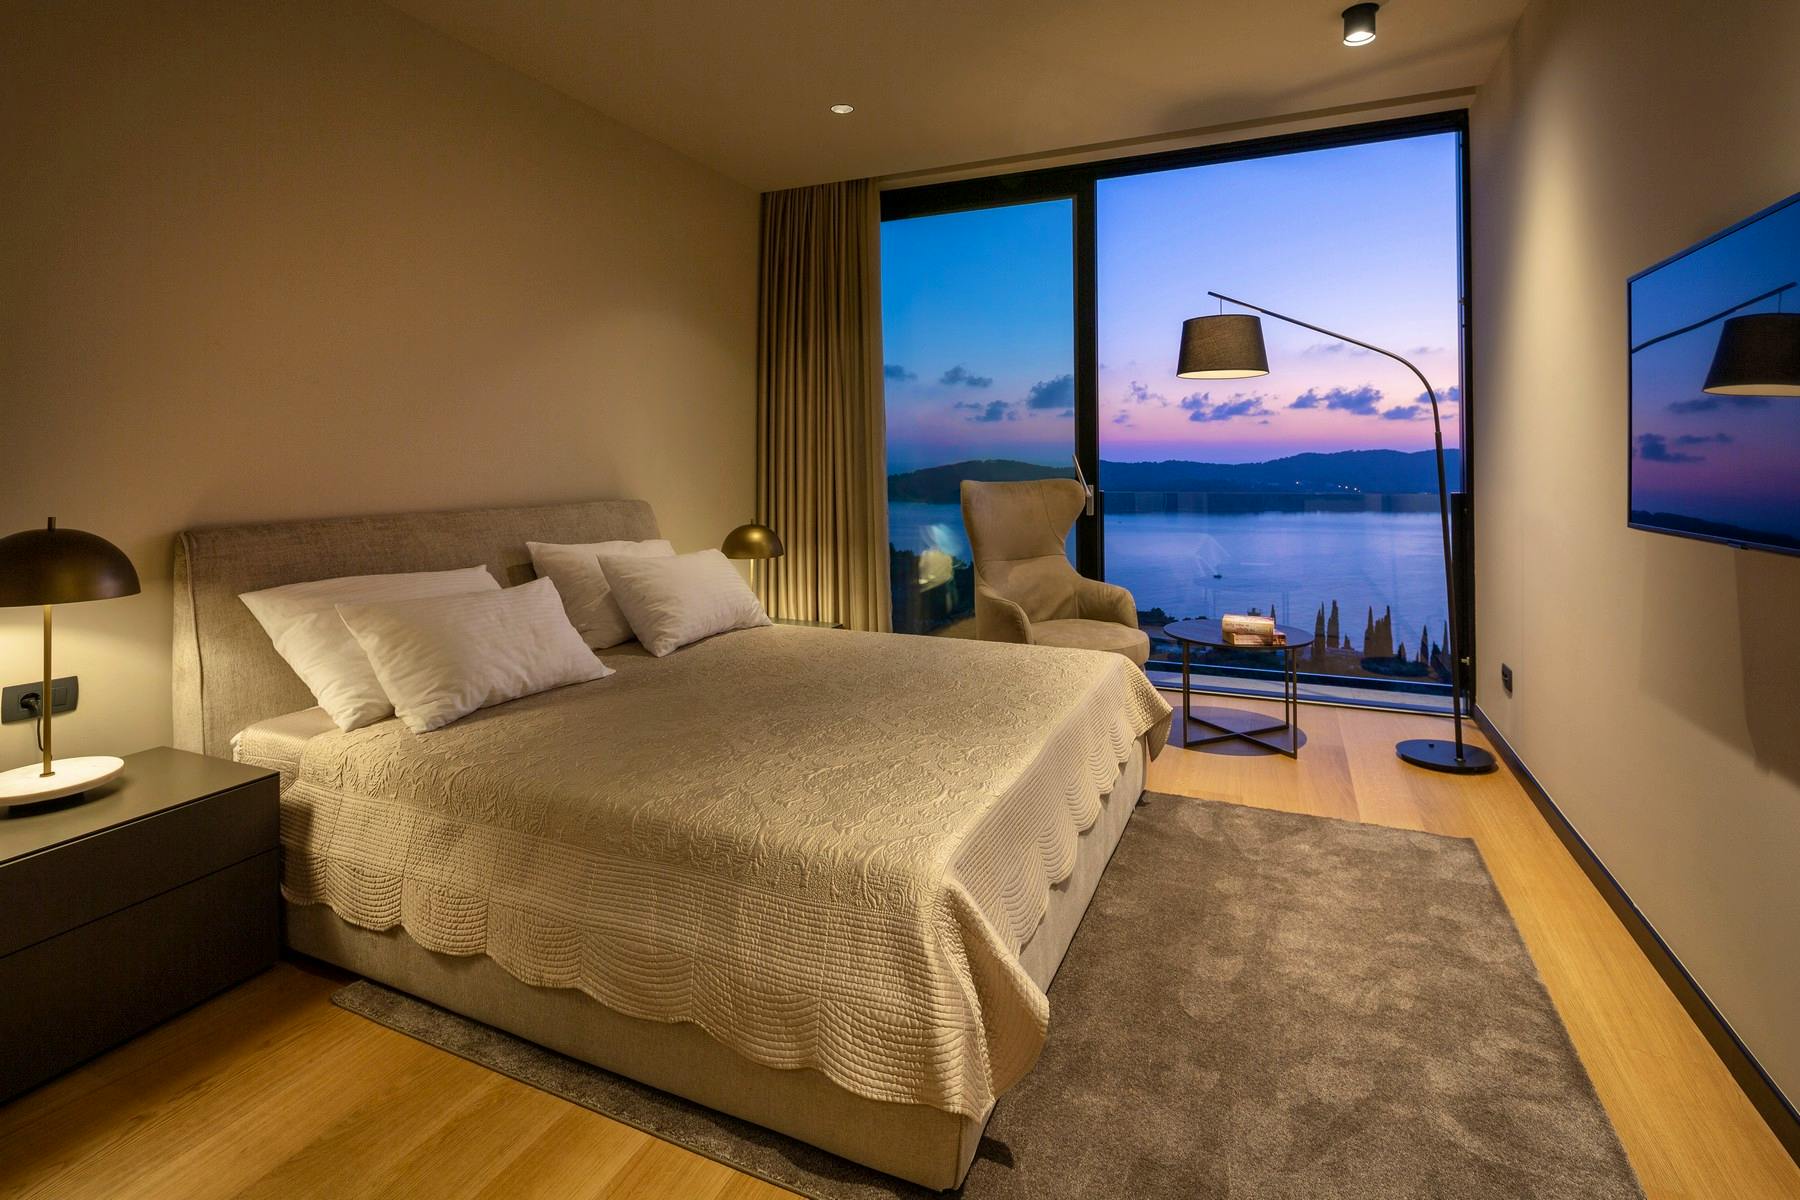 Scenic sea view from the bedroom